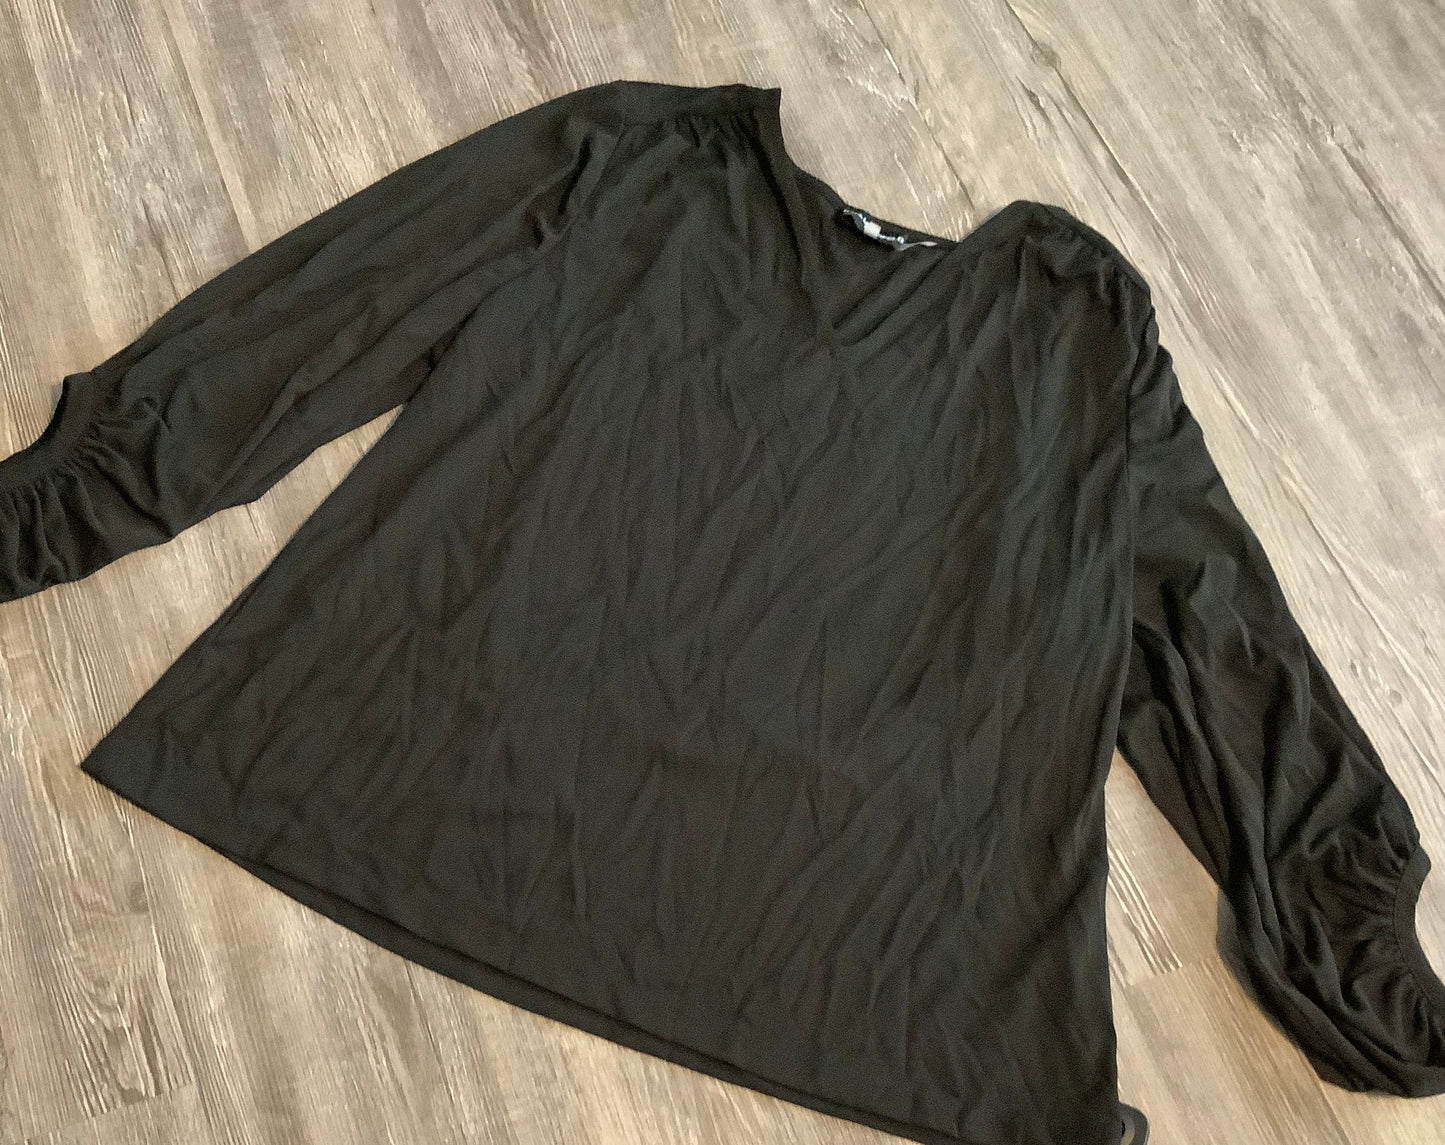 Top Long Sleeve By Karl Lagerfeld  Size: Xl